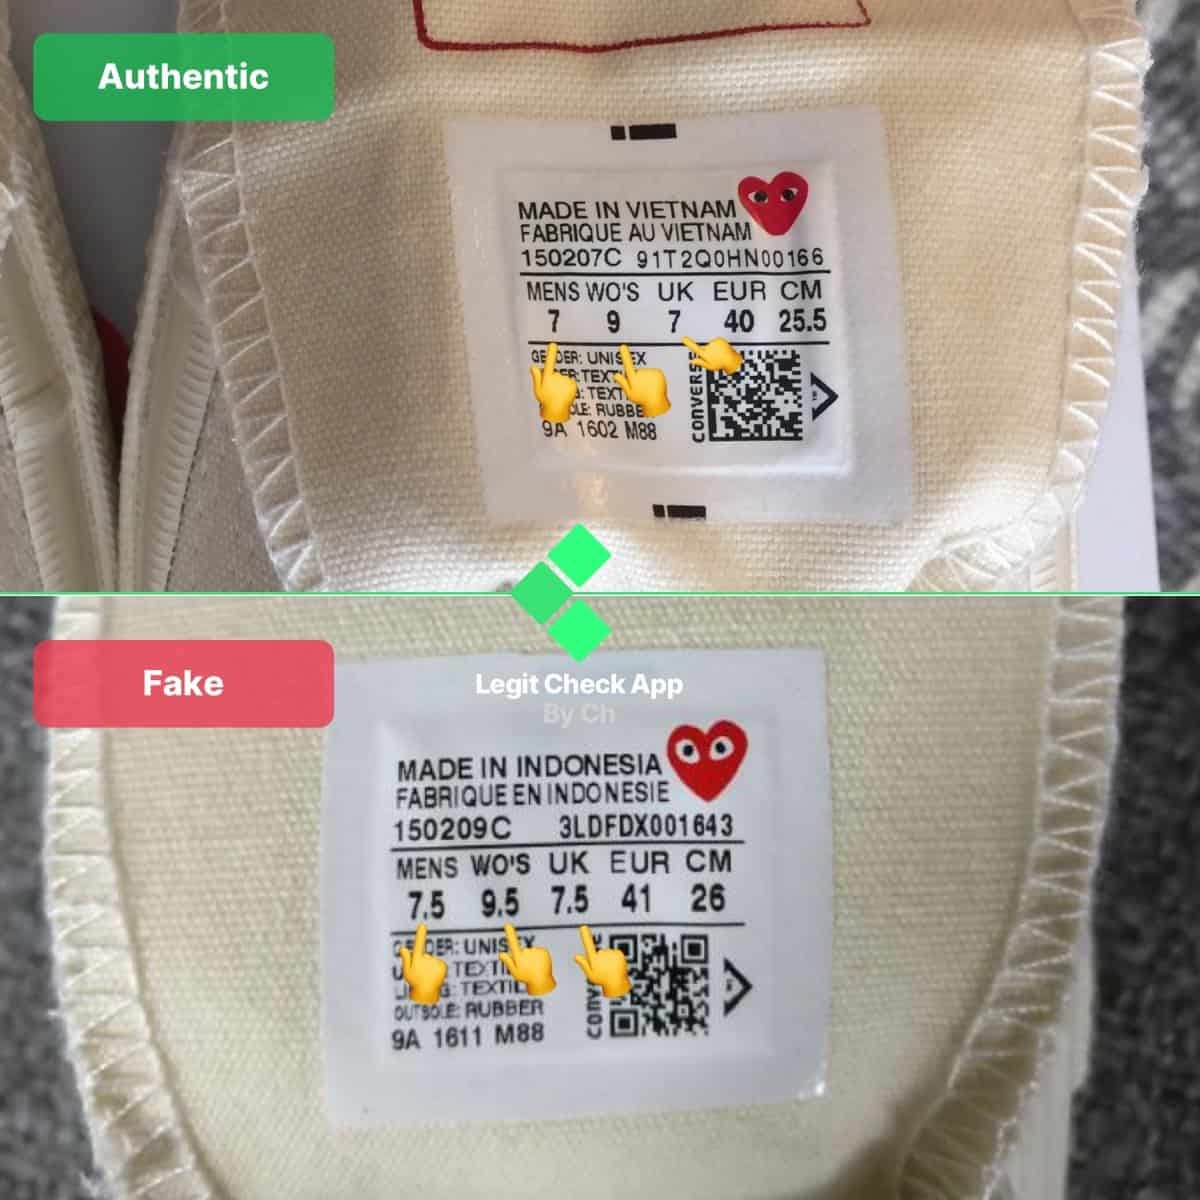 How To Spot Fake Comme Des Garcons CDG Converse Sneakers | by Legit Check  By Ch | Medium